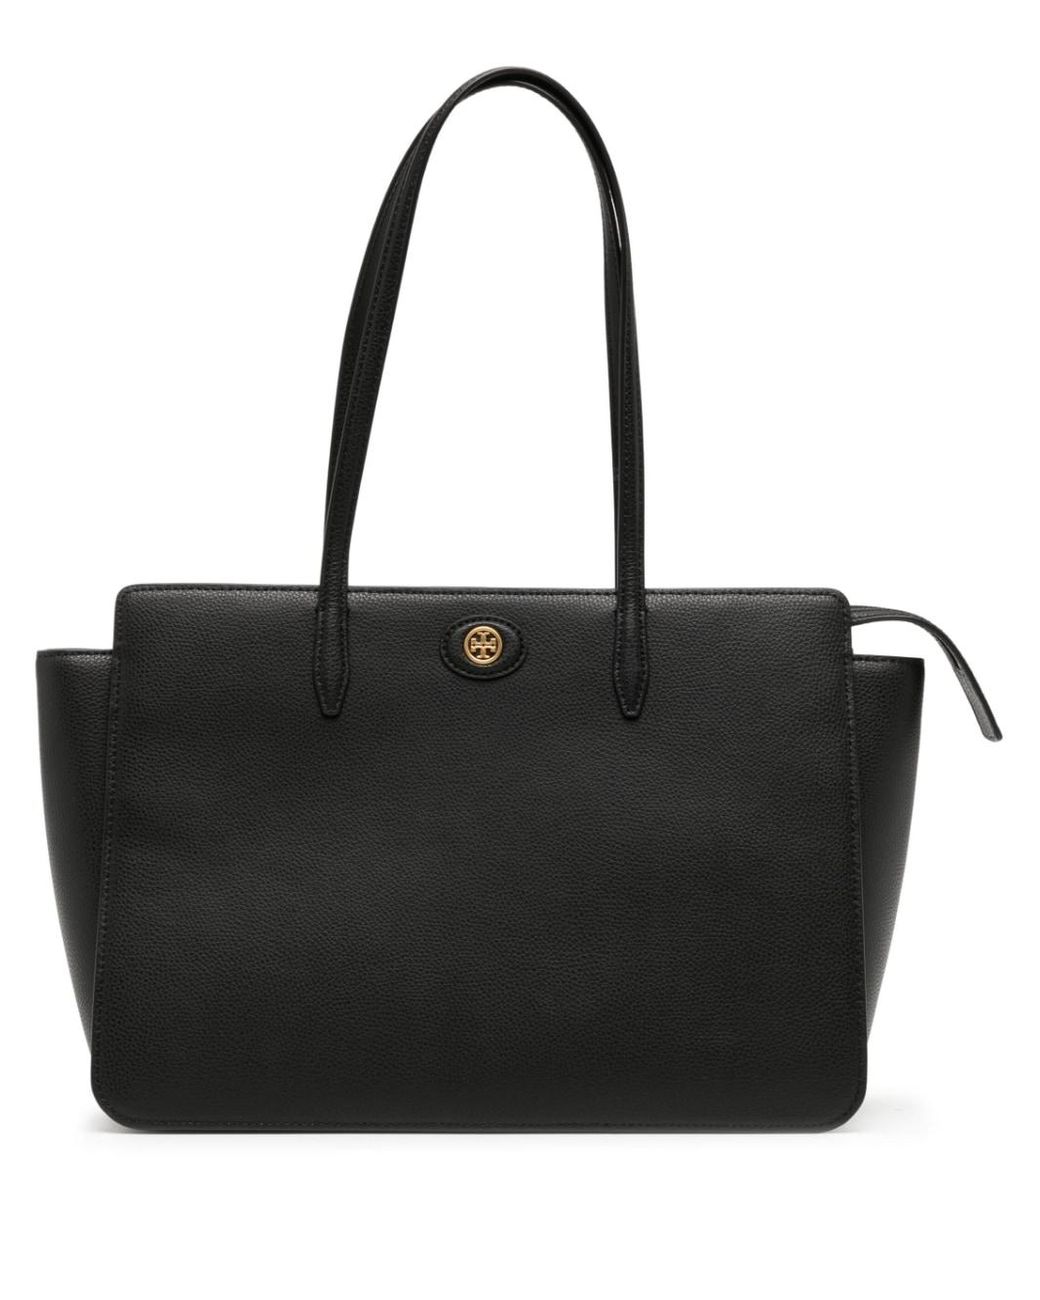 Tory Burch Robinson Pebbled Leather Tote Bag in Black | Lyst Australia